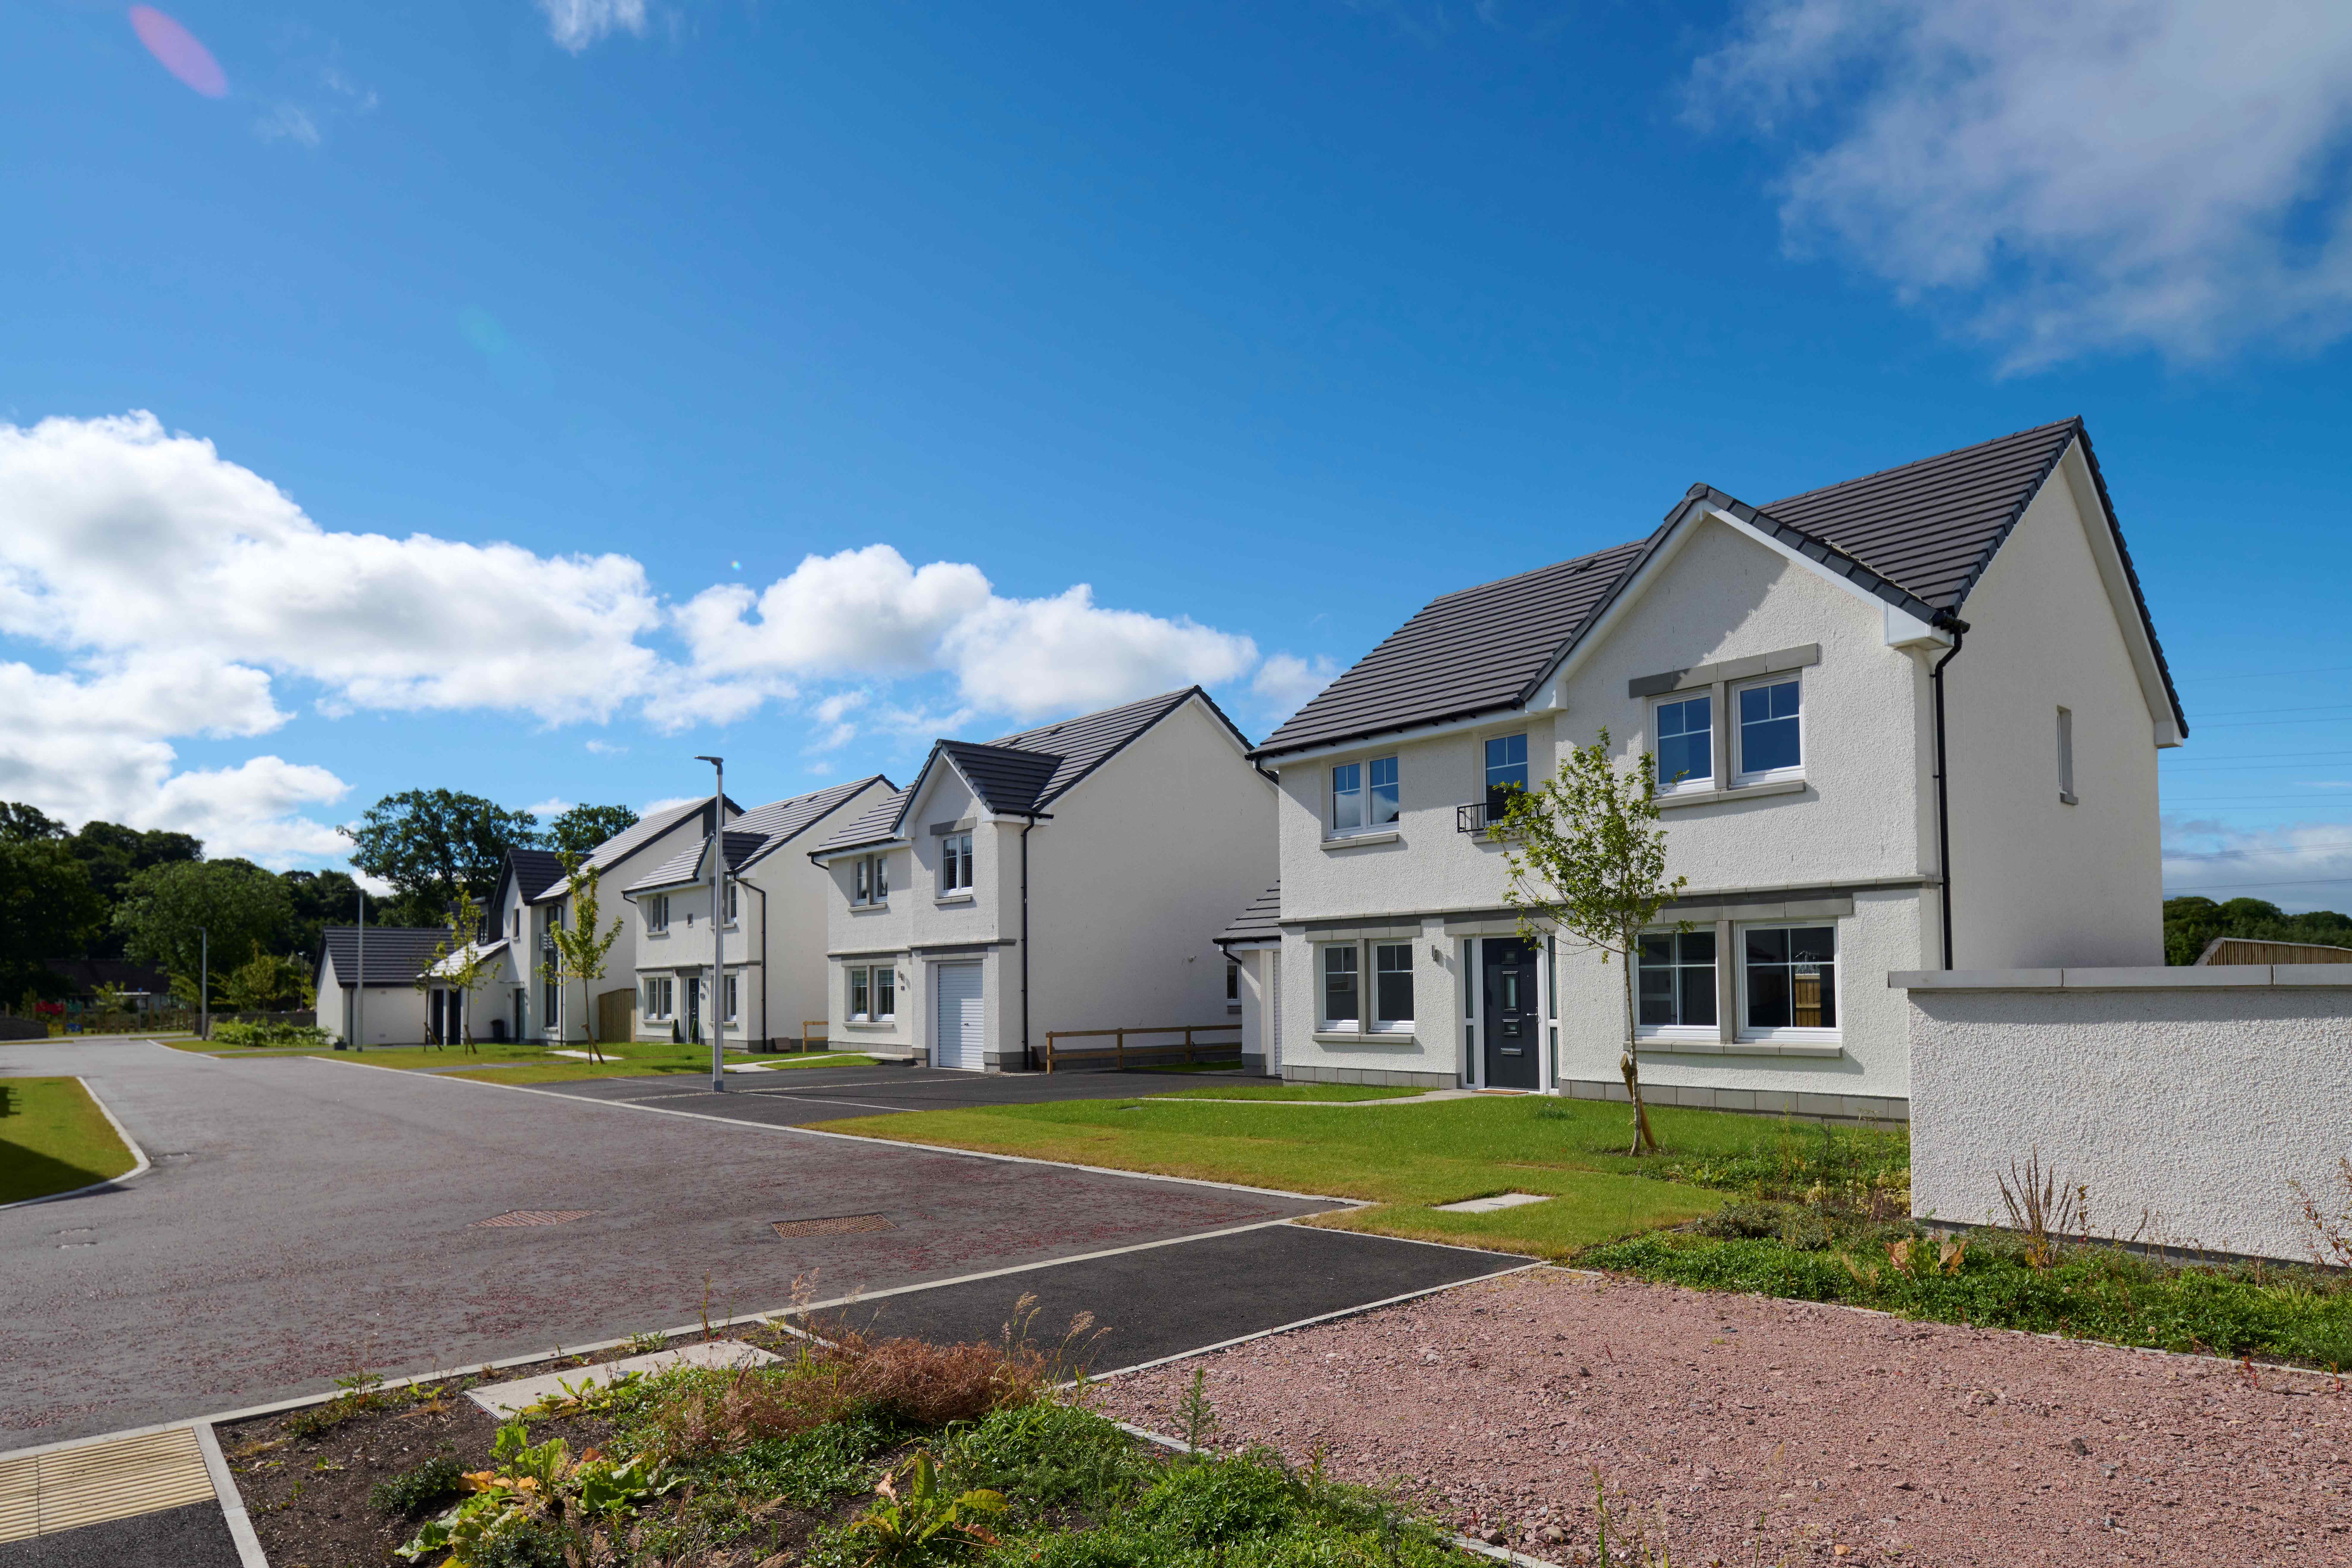 Tulloch Homes secures approval for Conon Bridge communities